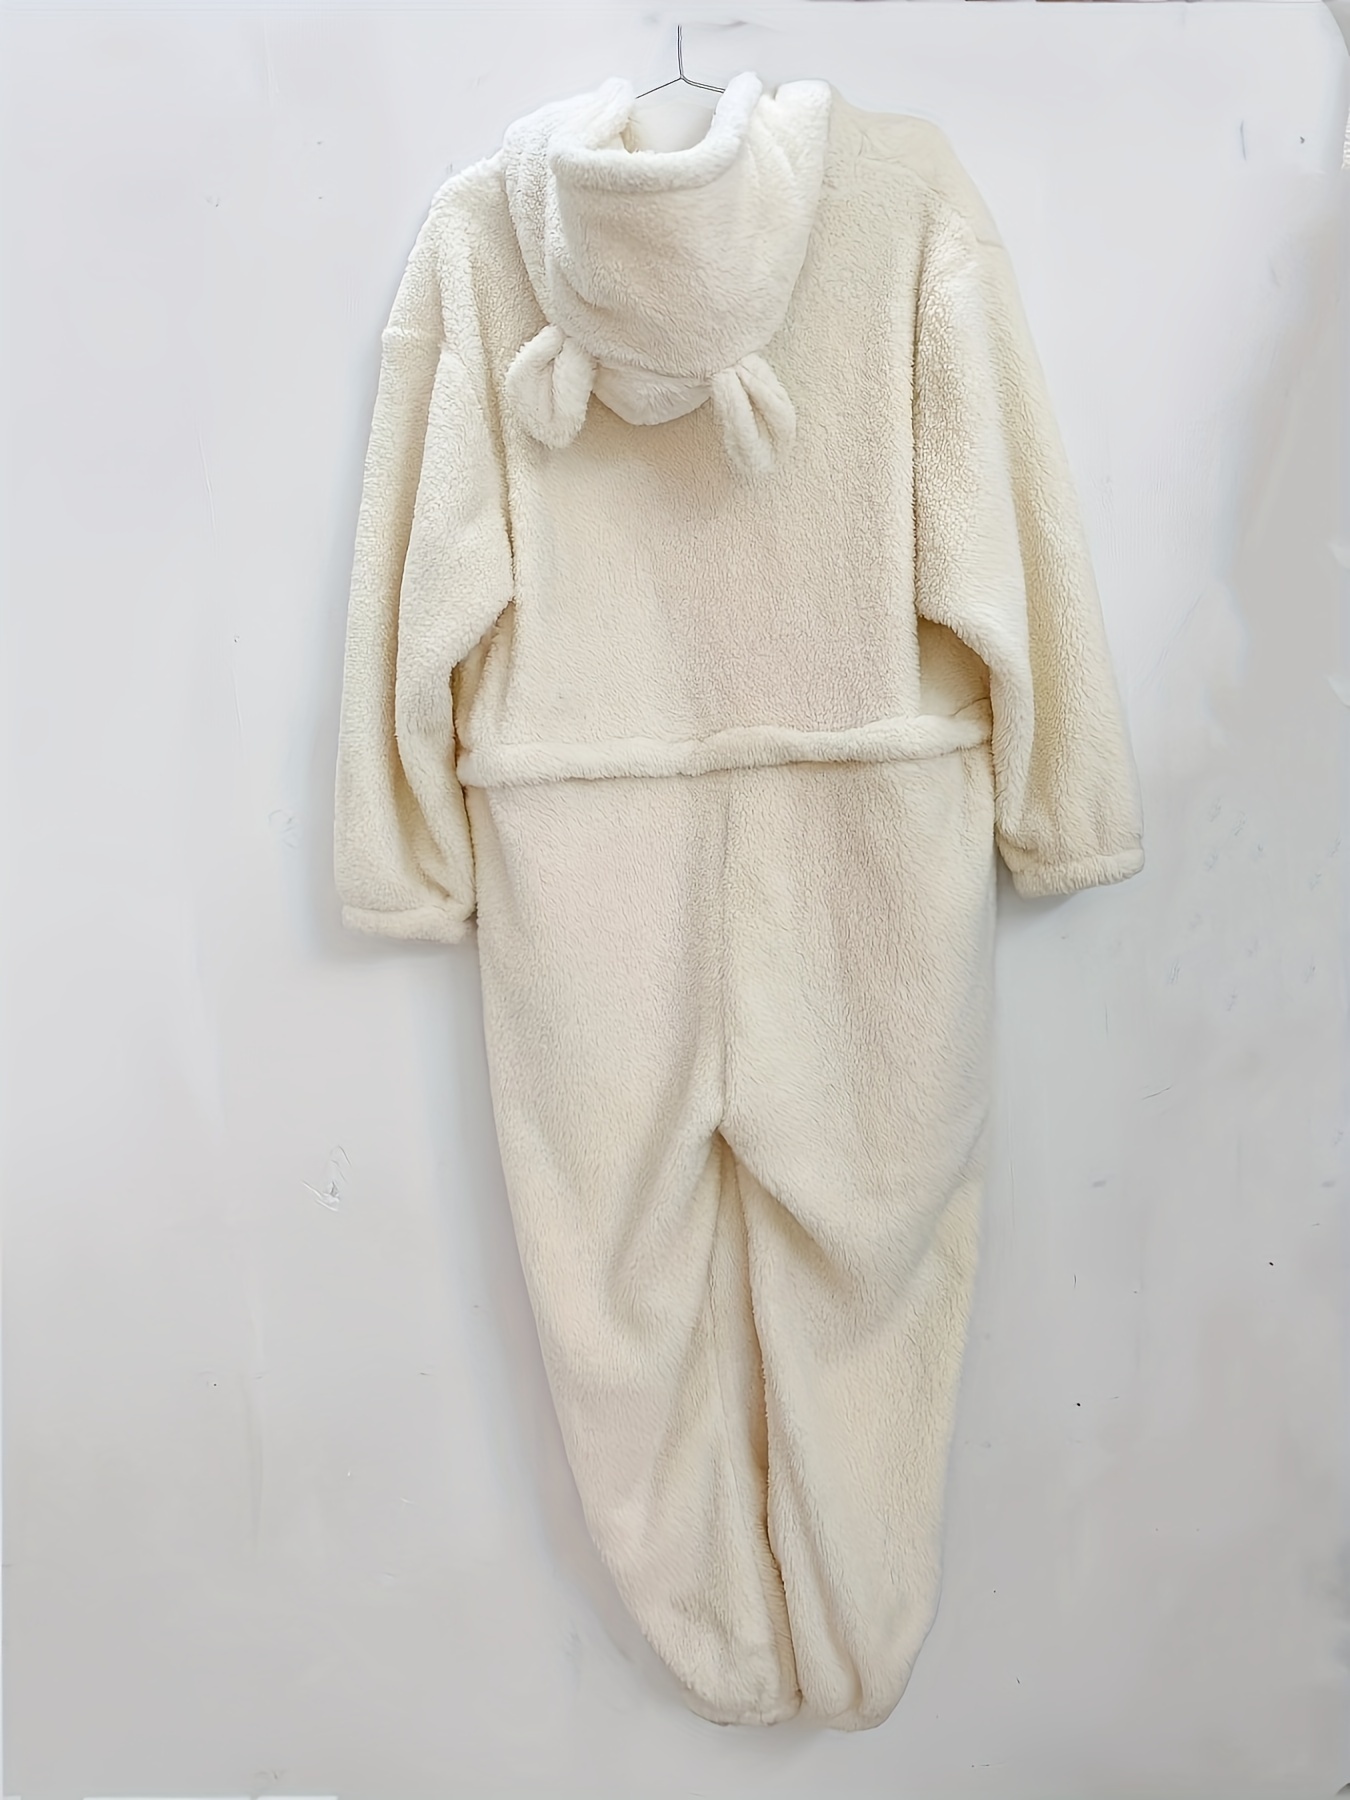 Solid Hooded Fuzzy Pajama Jumpsuit Music Festival Comfy Long - Temu Canada